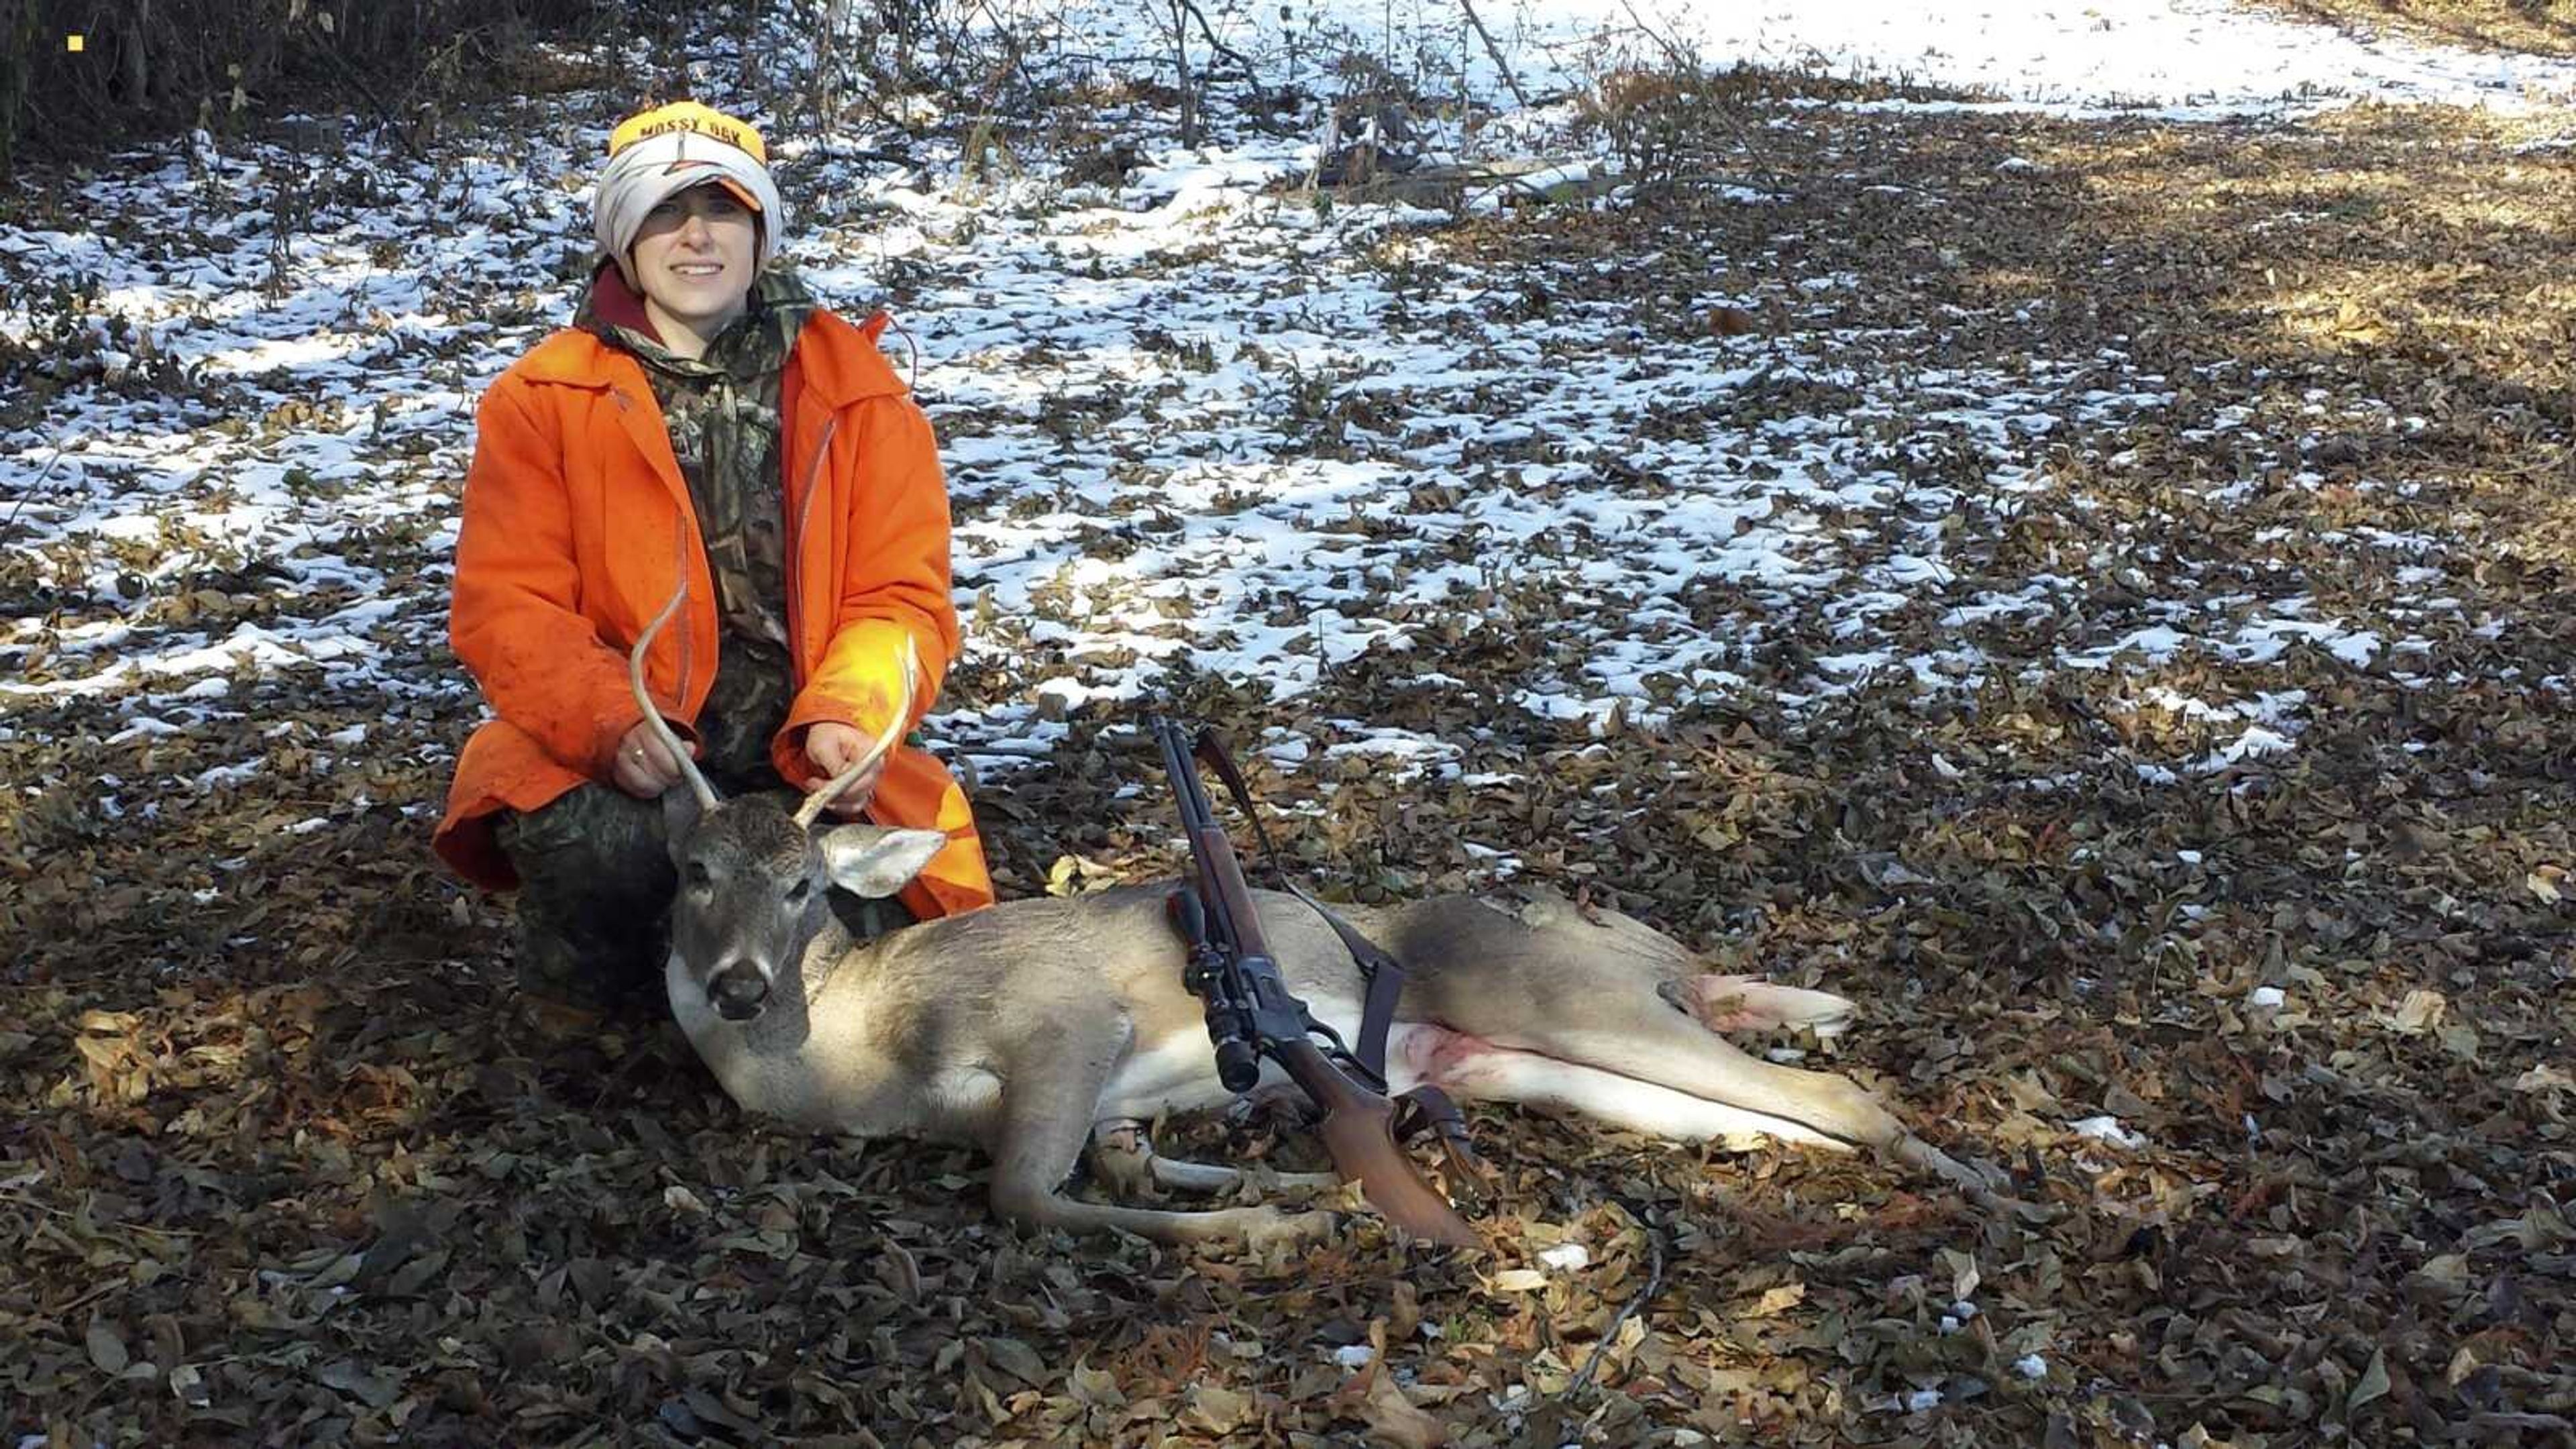 Rise in female hunters due to family traditions